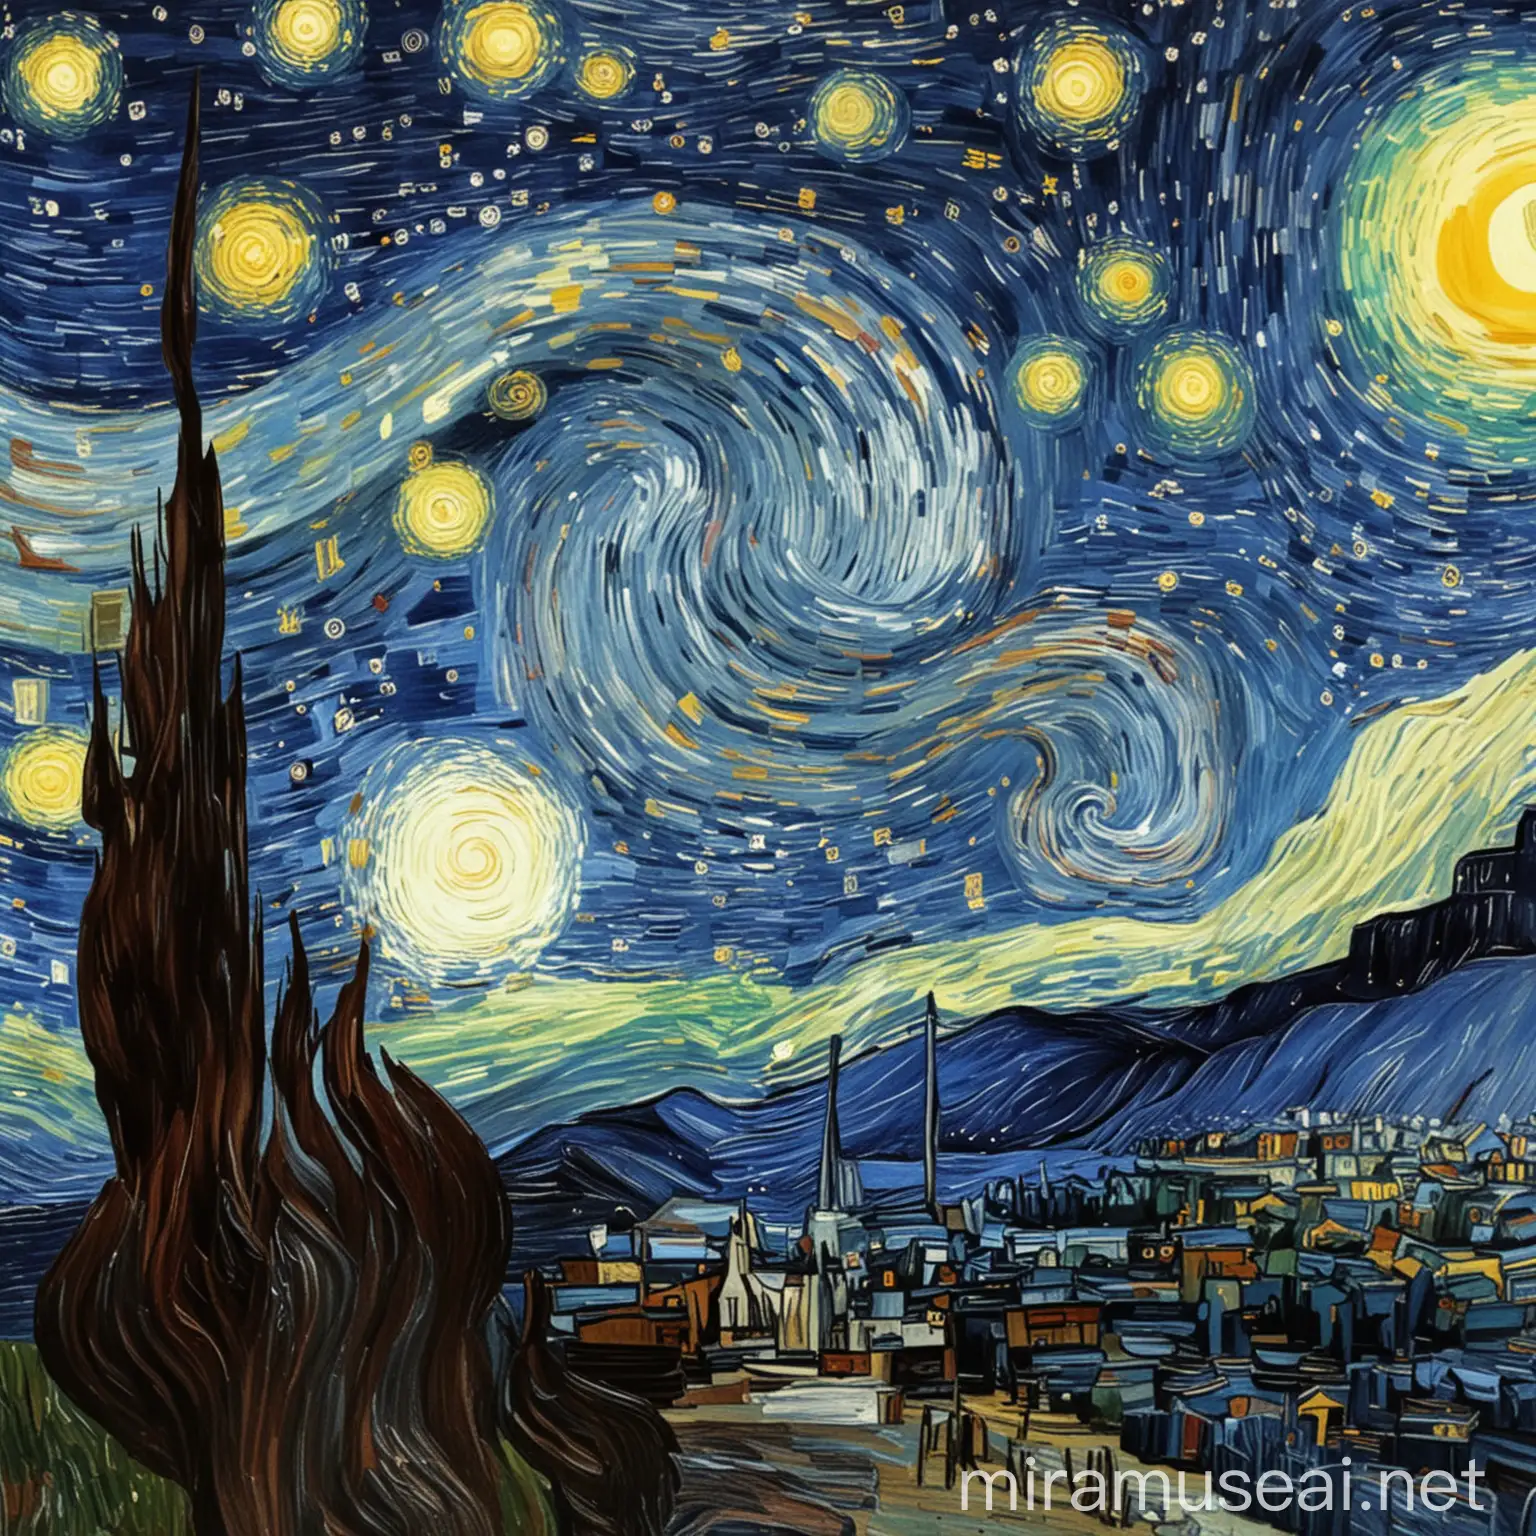 Starry Night Inspired by Vincent van Gogh with a Mars Twist